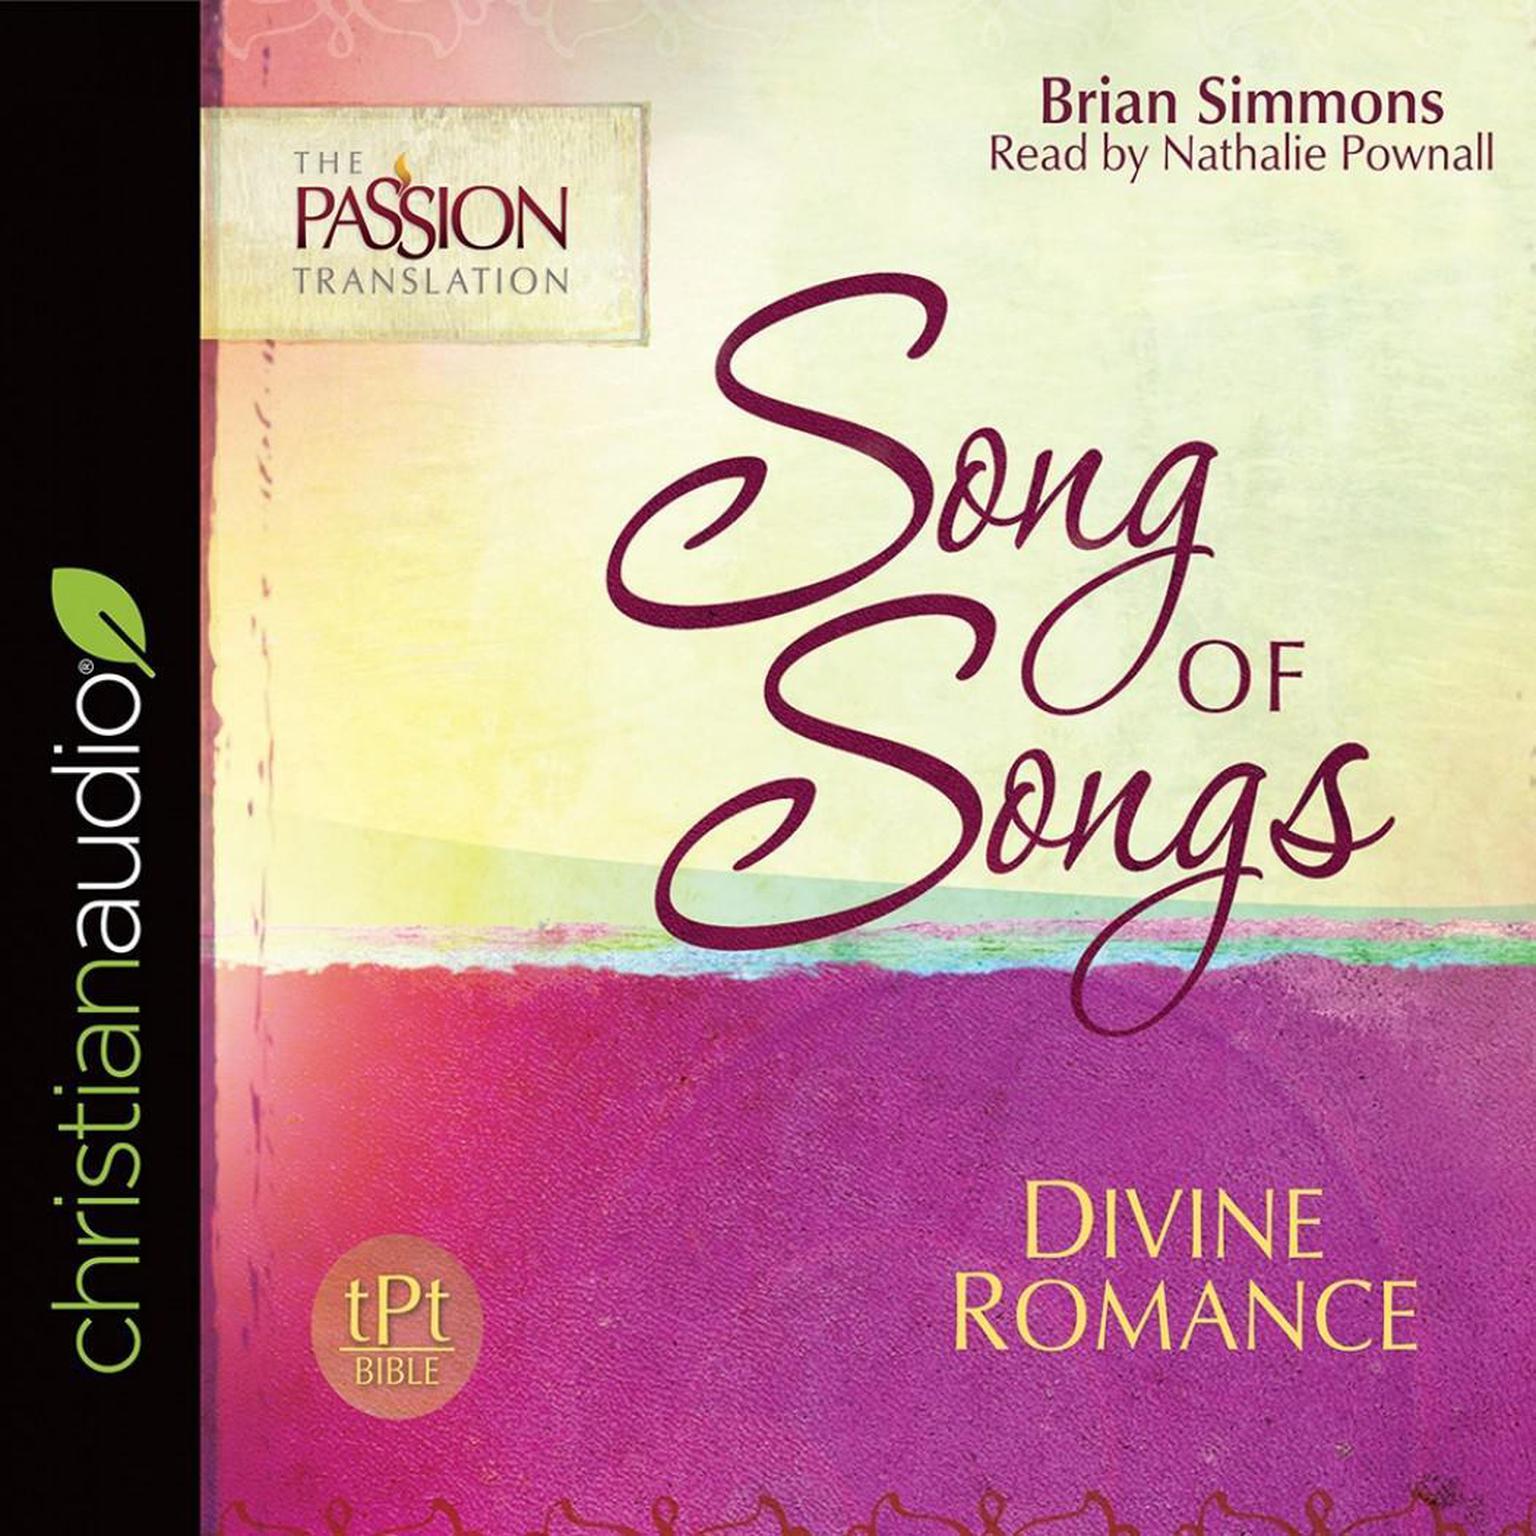 Song of Songs: Divine Romance Audiobook, by Brian Simmons